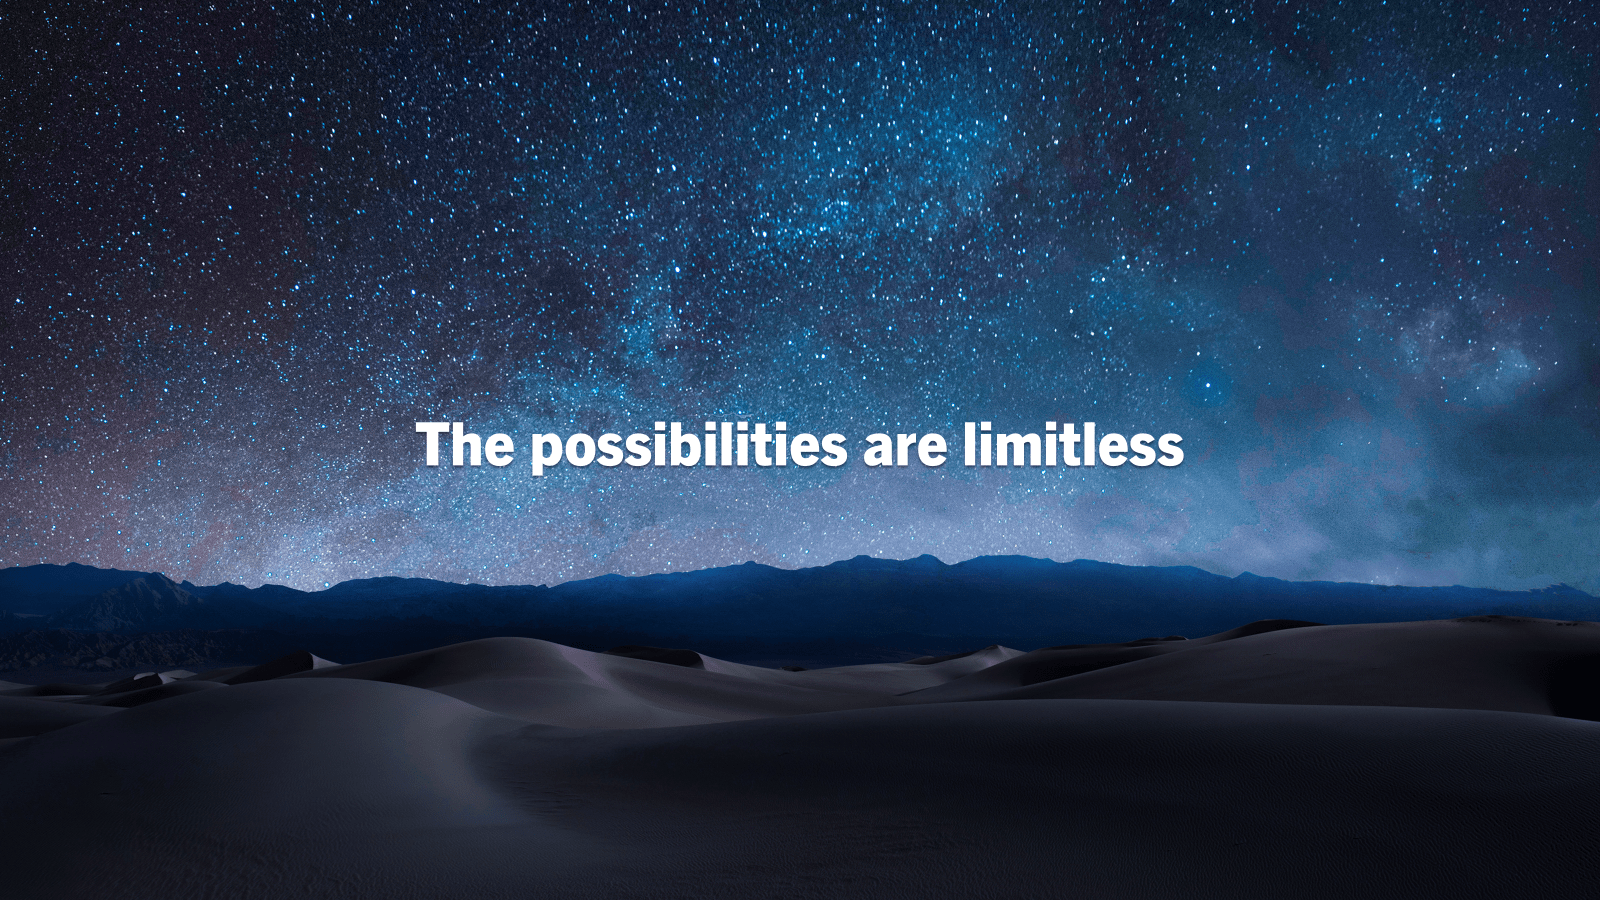 Dark mountains sit below a starry sky. White text reads 'The possibilities are limitless"